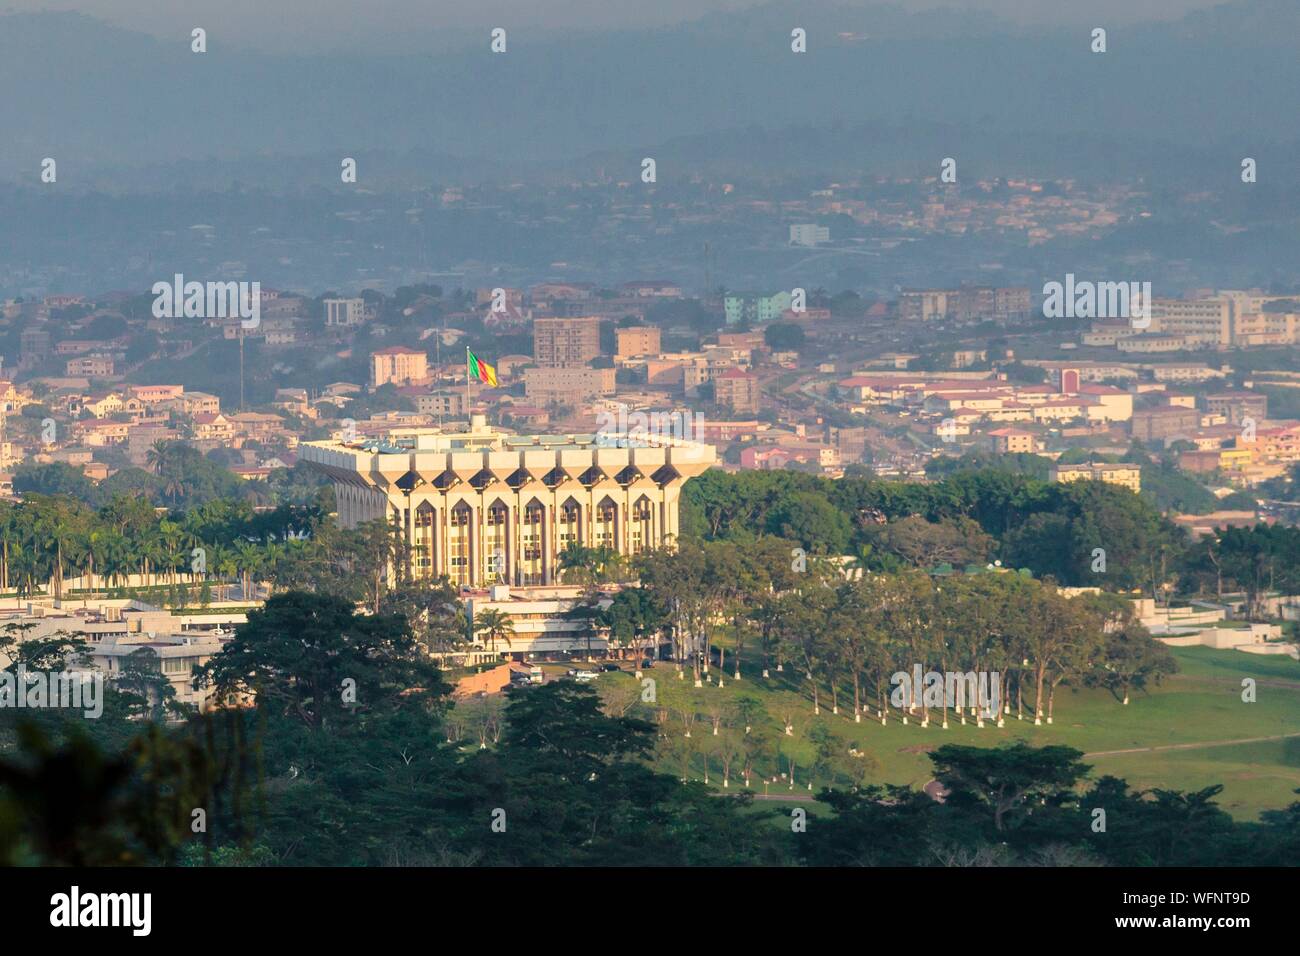 Cameroon, Centre Region, Mfoundi Department, Yaounde, Mount Febe, elevated view of the Unity Palace by architect Olivier Clement Cacoub, headquarters of State Presidency Stock Photo